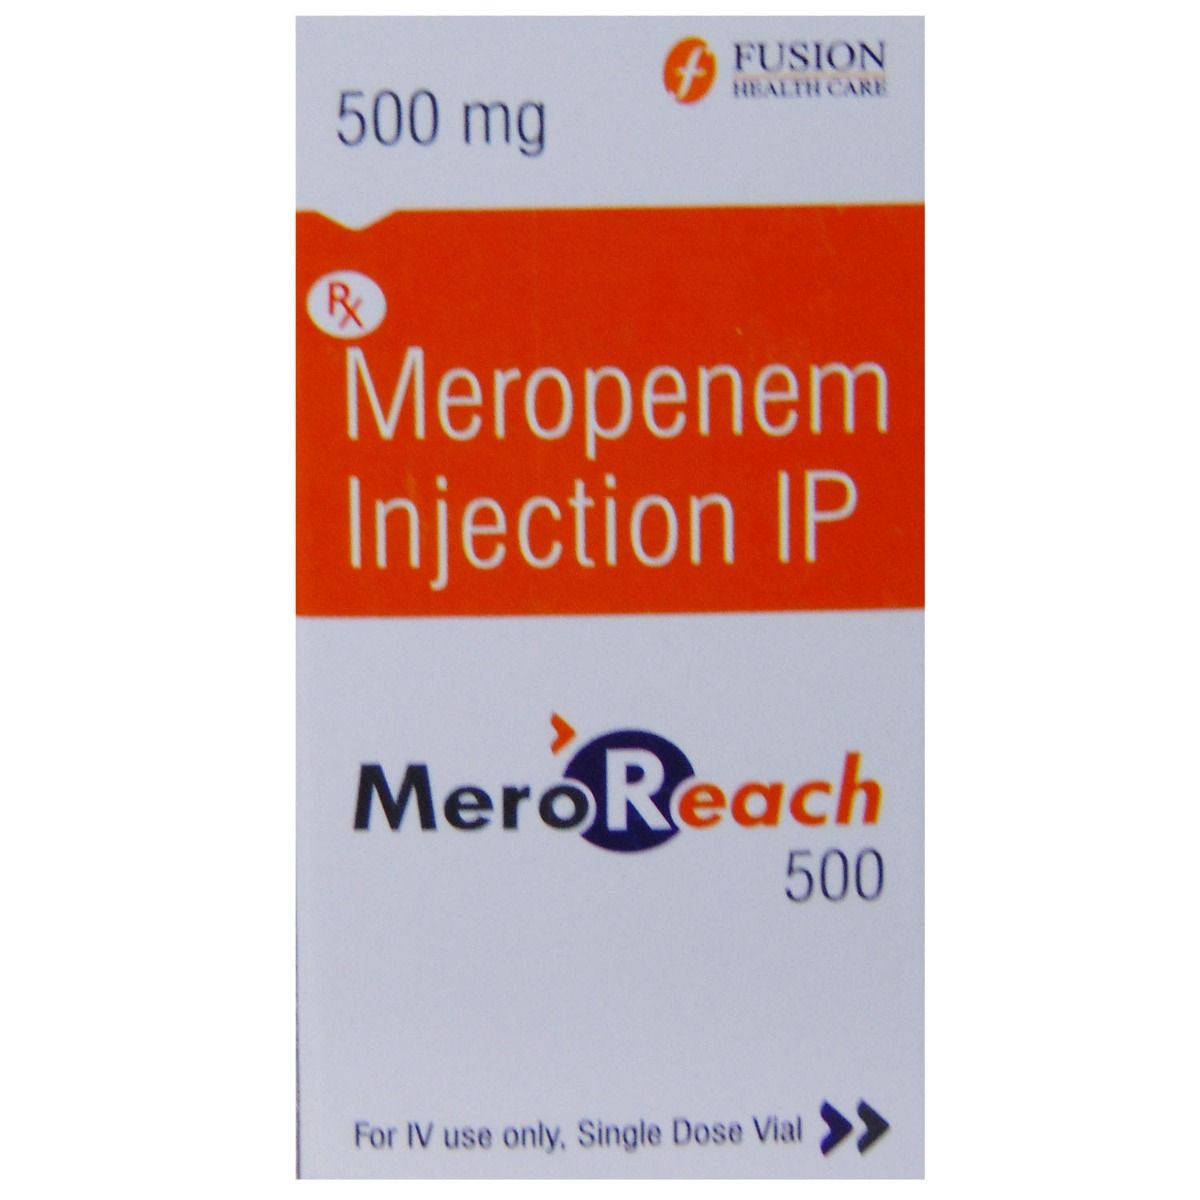 MEROREACH 500MG INJECTION, Pack of 1 INJECTION